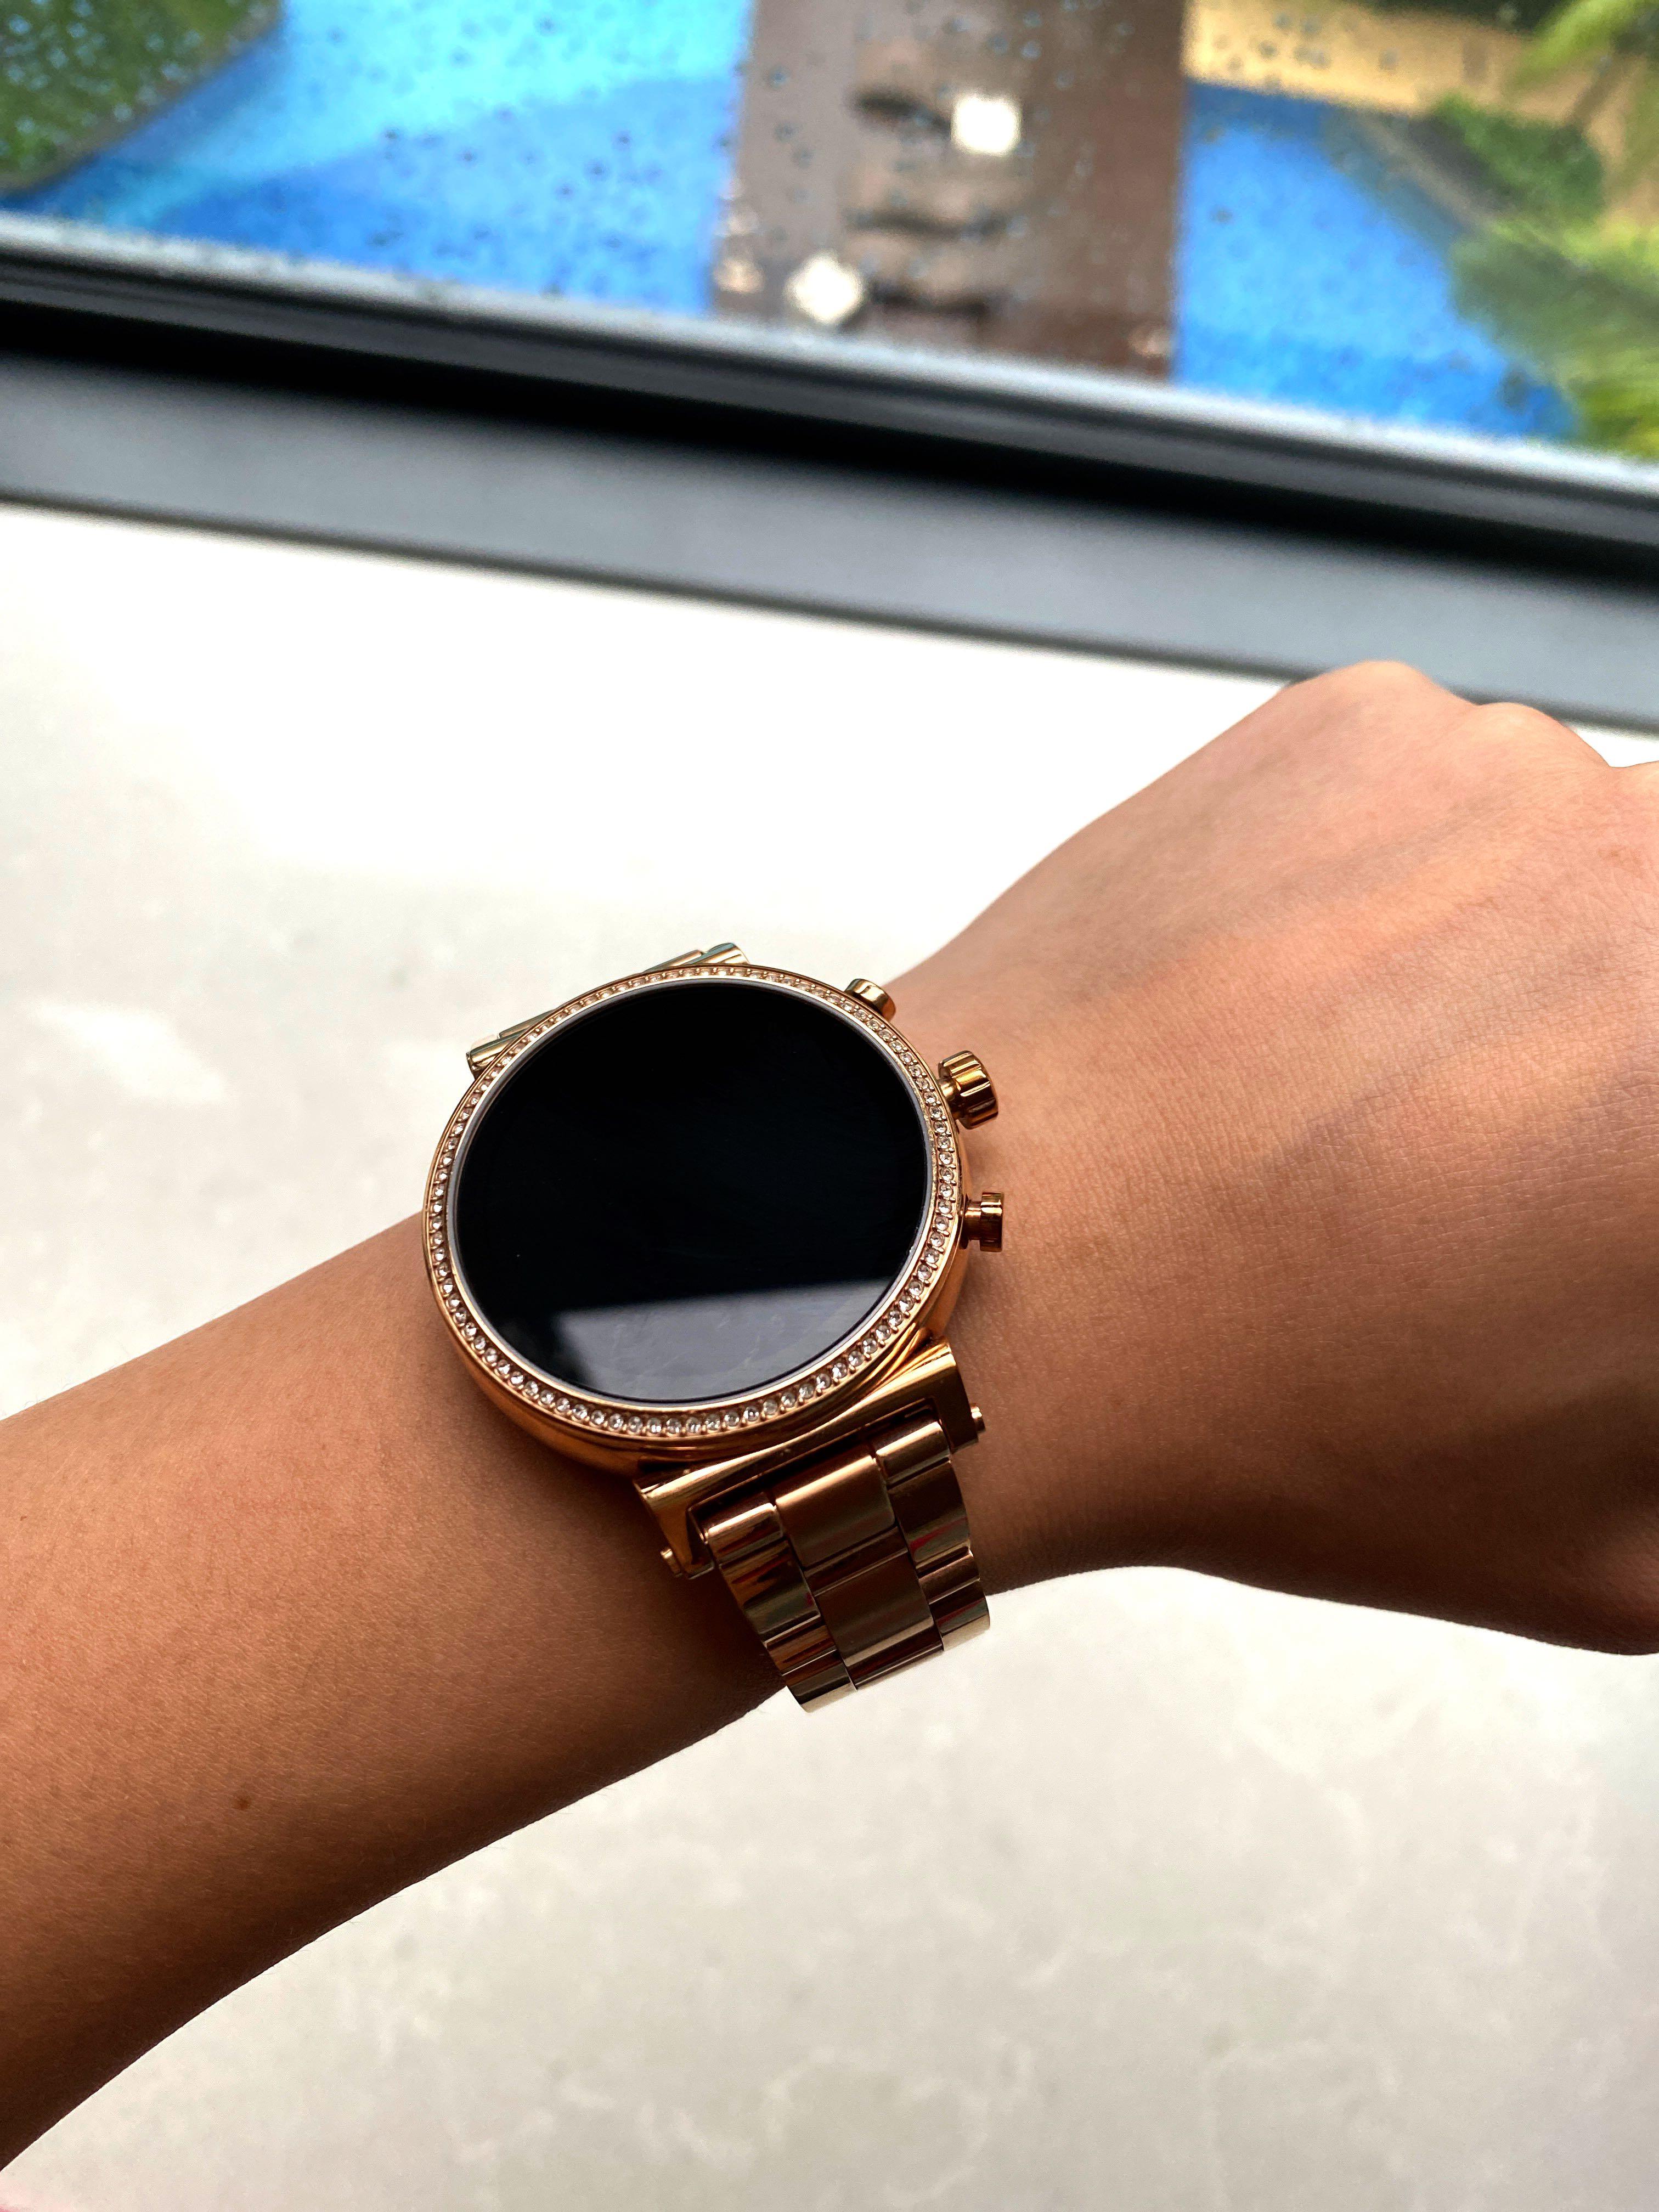 Access Gen 4 Sofie Rose Goldtone and Embossed Silicone Smartwatch MKT   Thiên Đường Hàng Hiệu